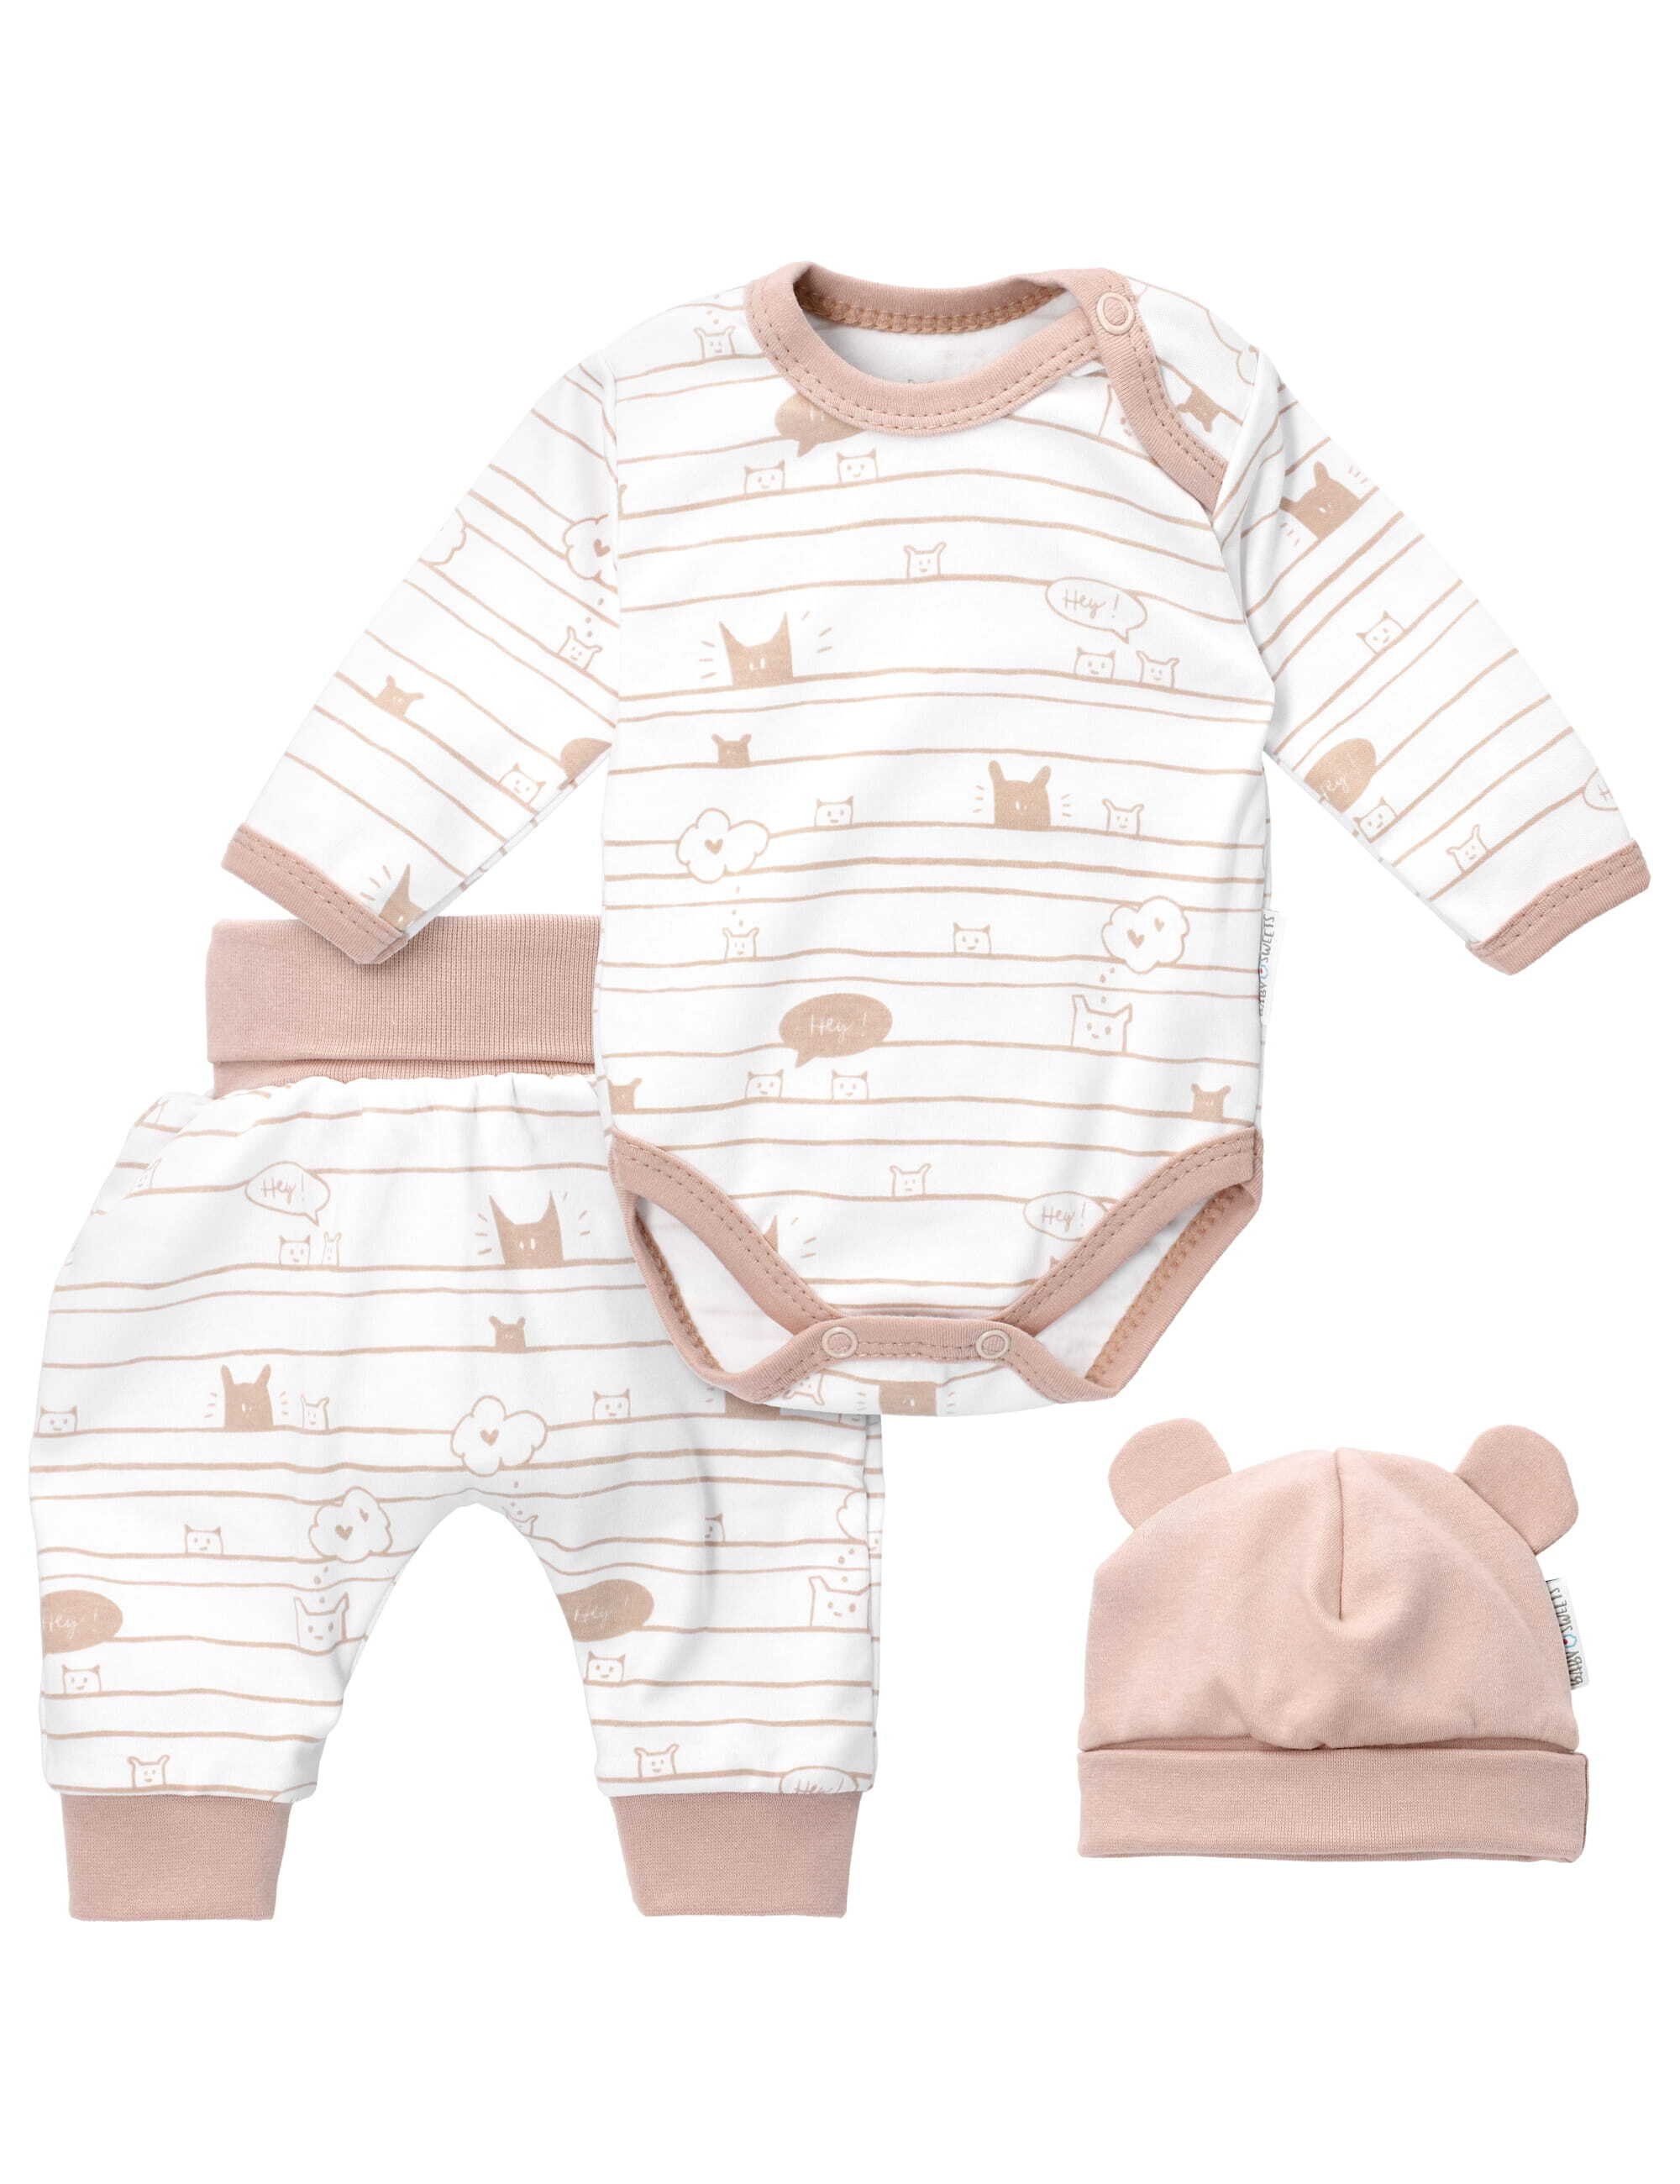 Sweets creme Set Hose beige Baby Body Tiere (3-tlg., & 3 Teile)